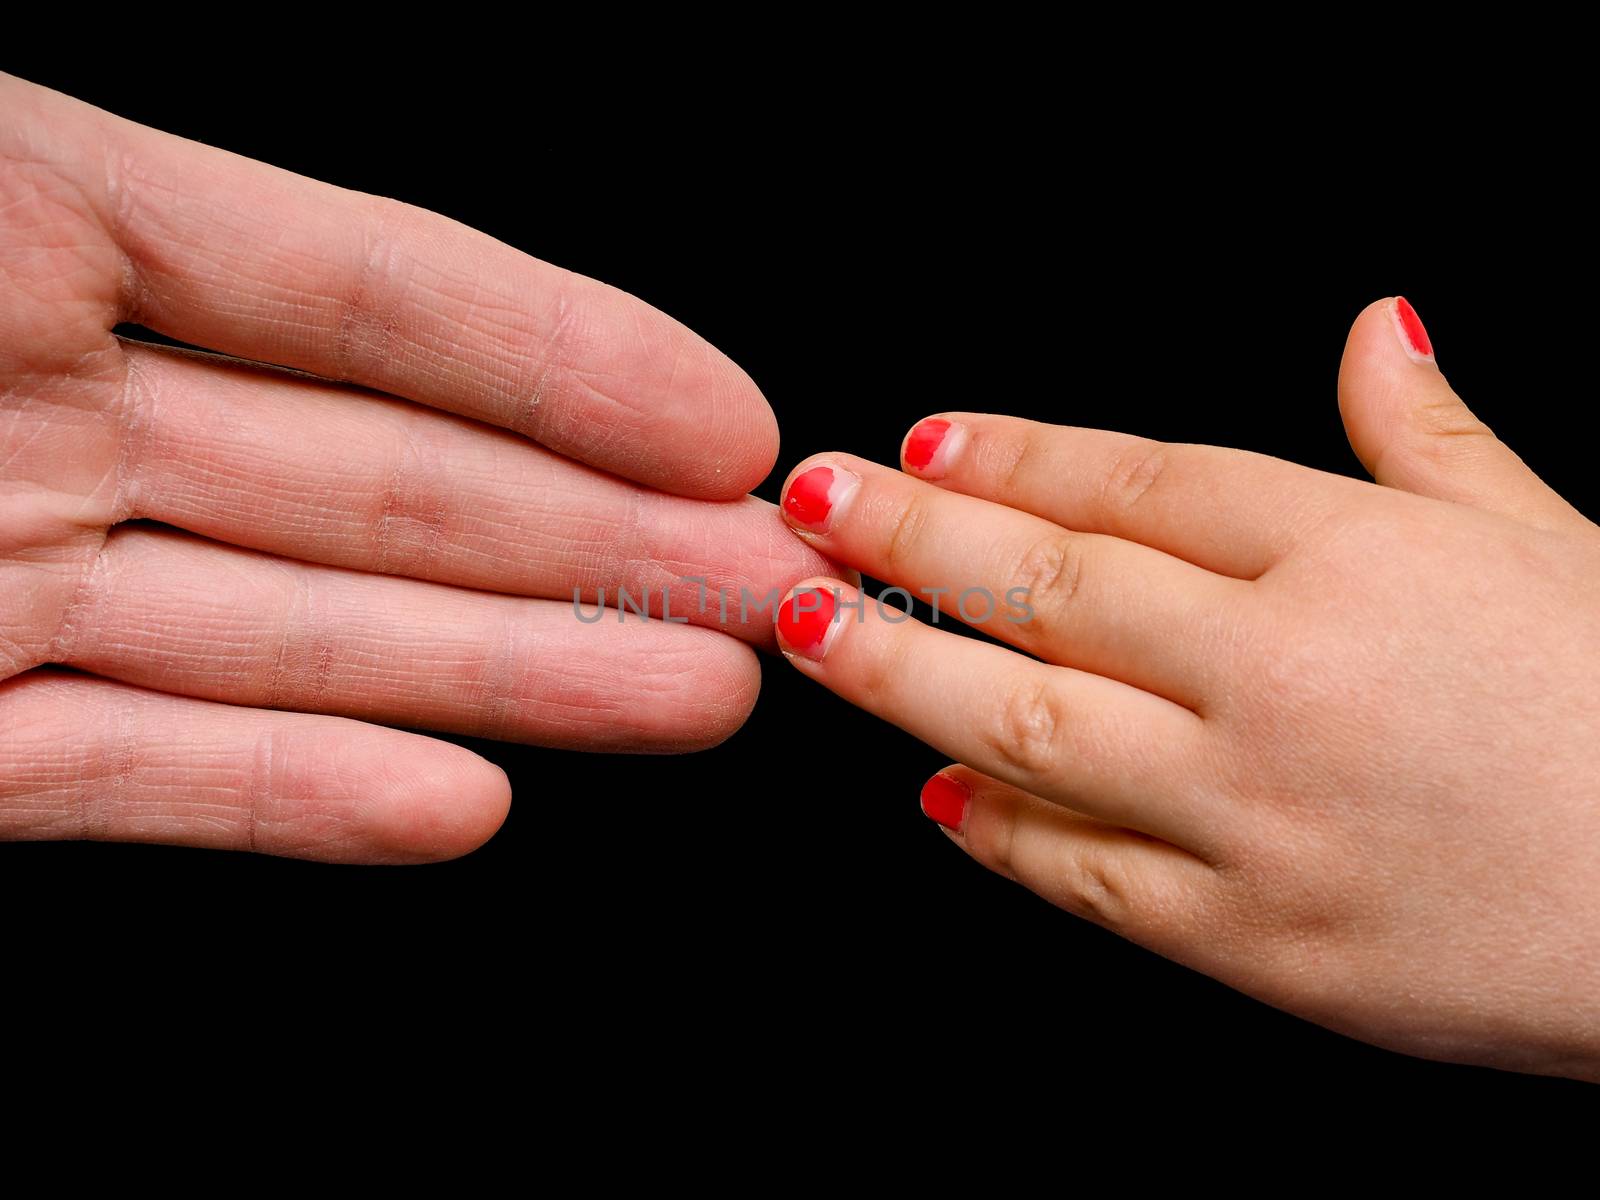 Big hand palm meeting small girl hand with cracked pink nail paint isolated on black